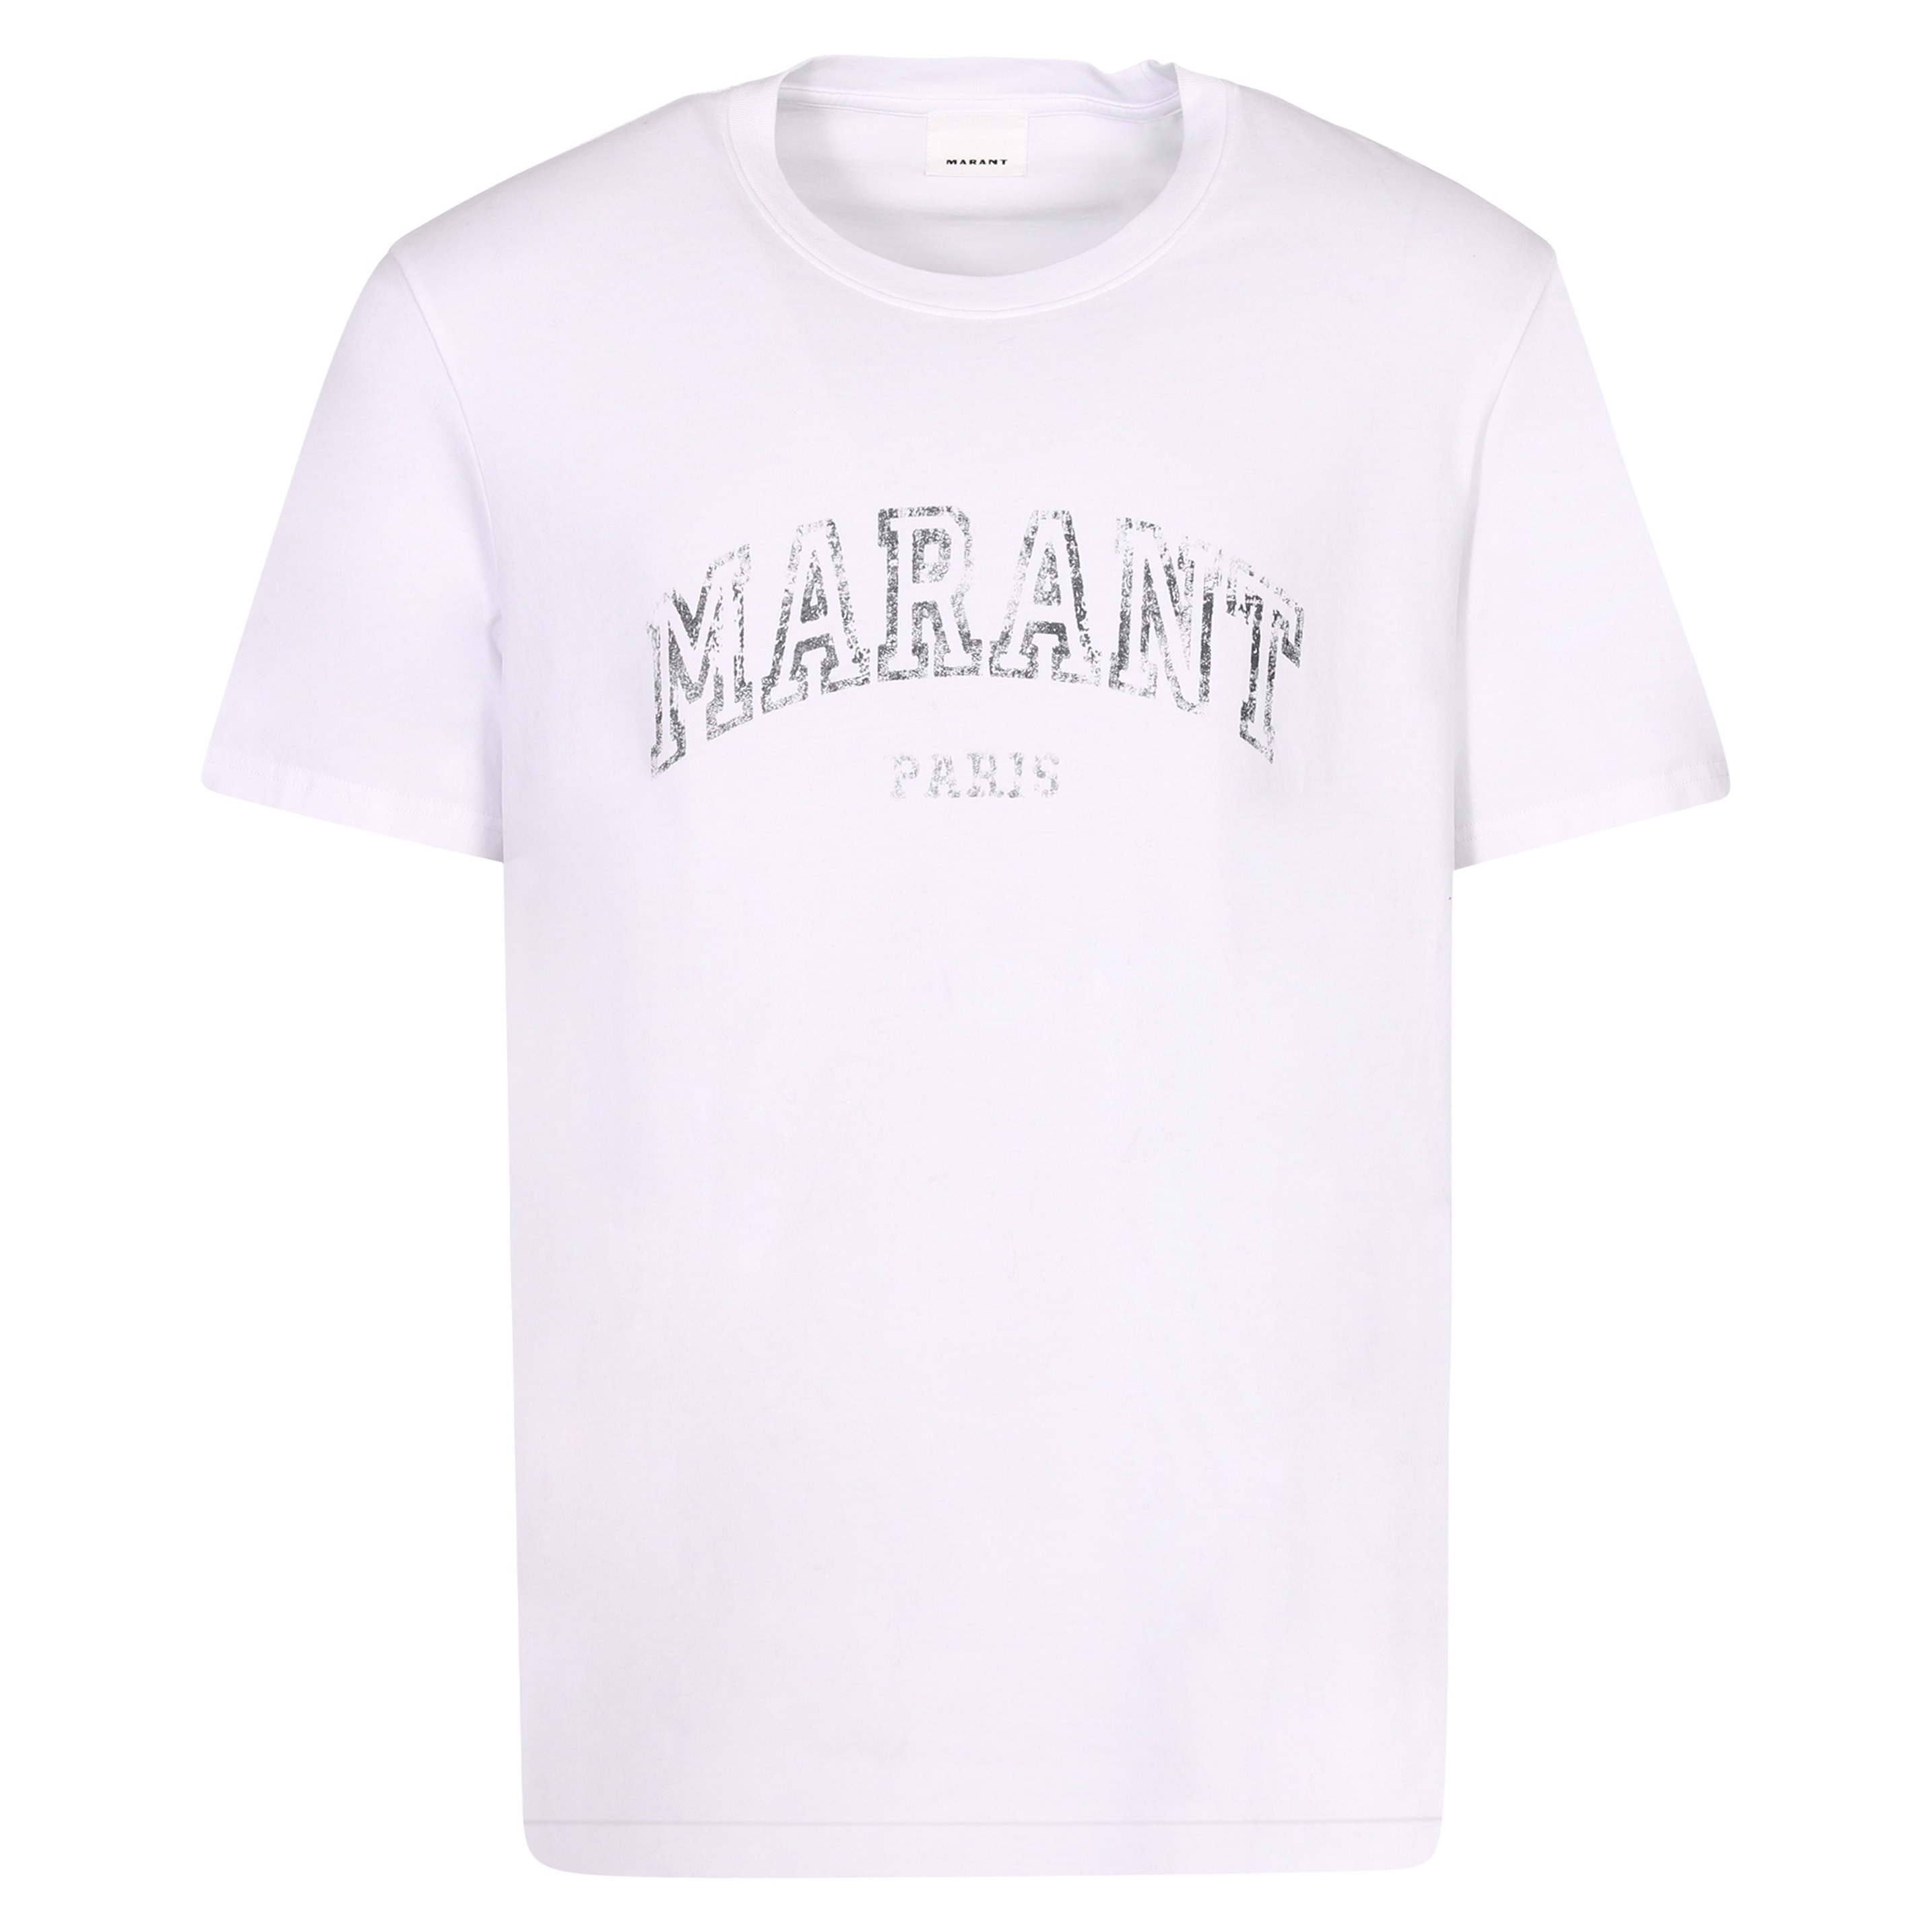 Isabel Marant Honore T-Shirt in White